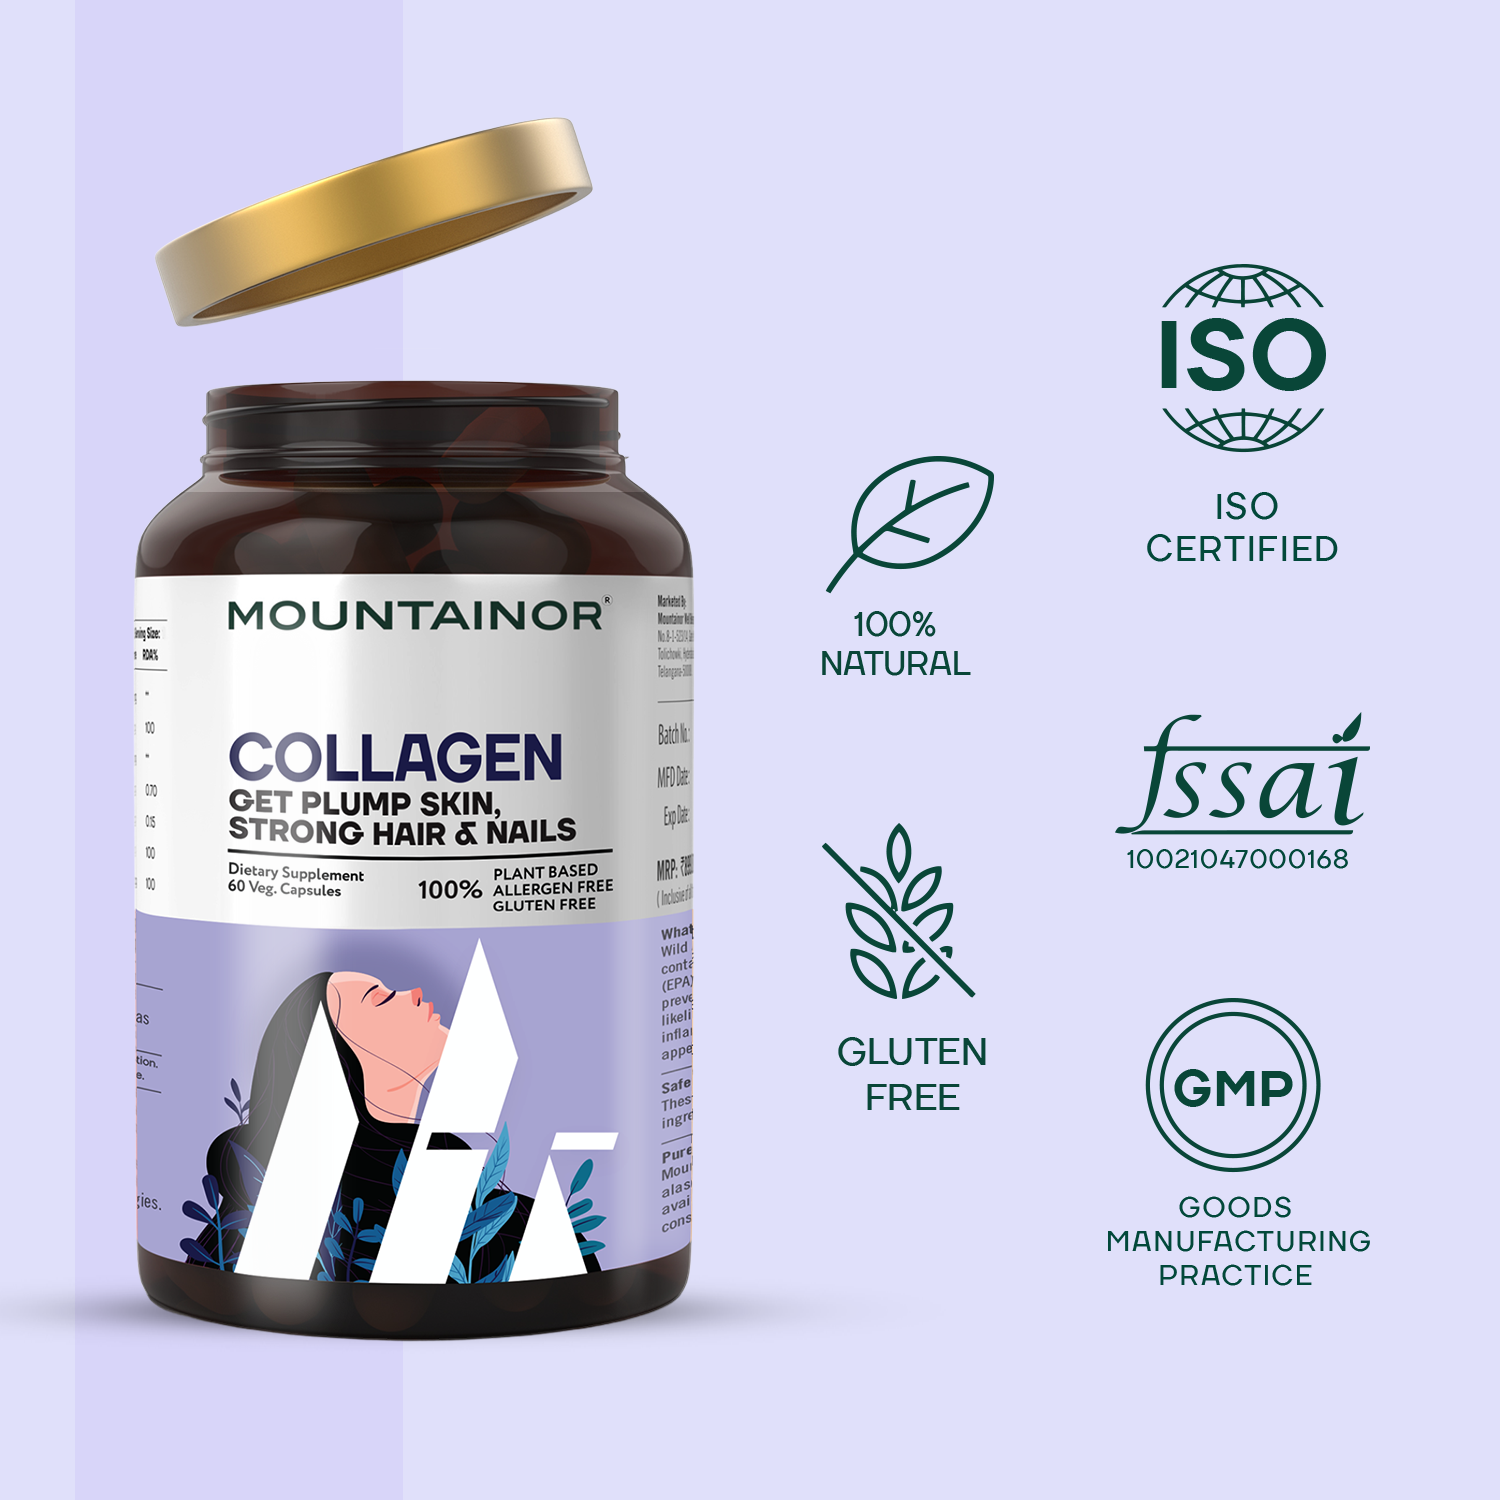 Collagen Capsules 👩🏻🧑🏻✨ for Healthier Skin, Hair & Joints - 60 Caps